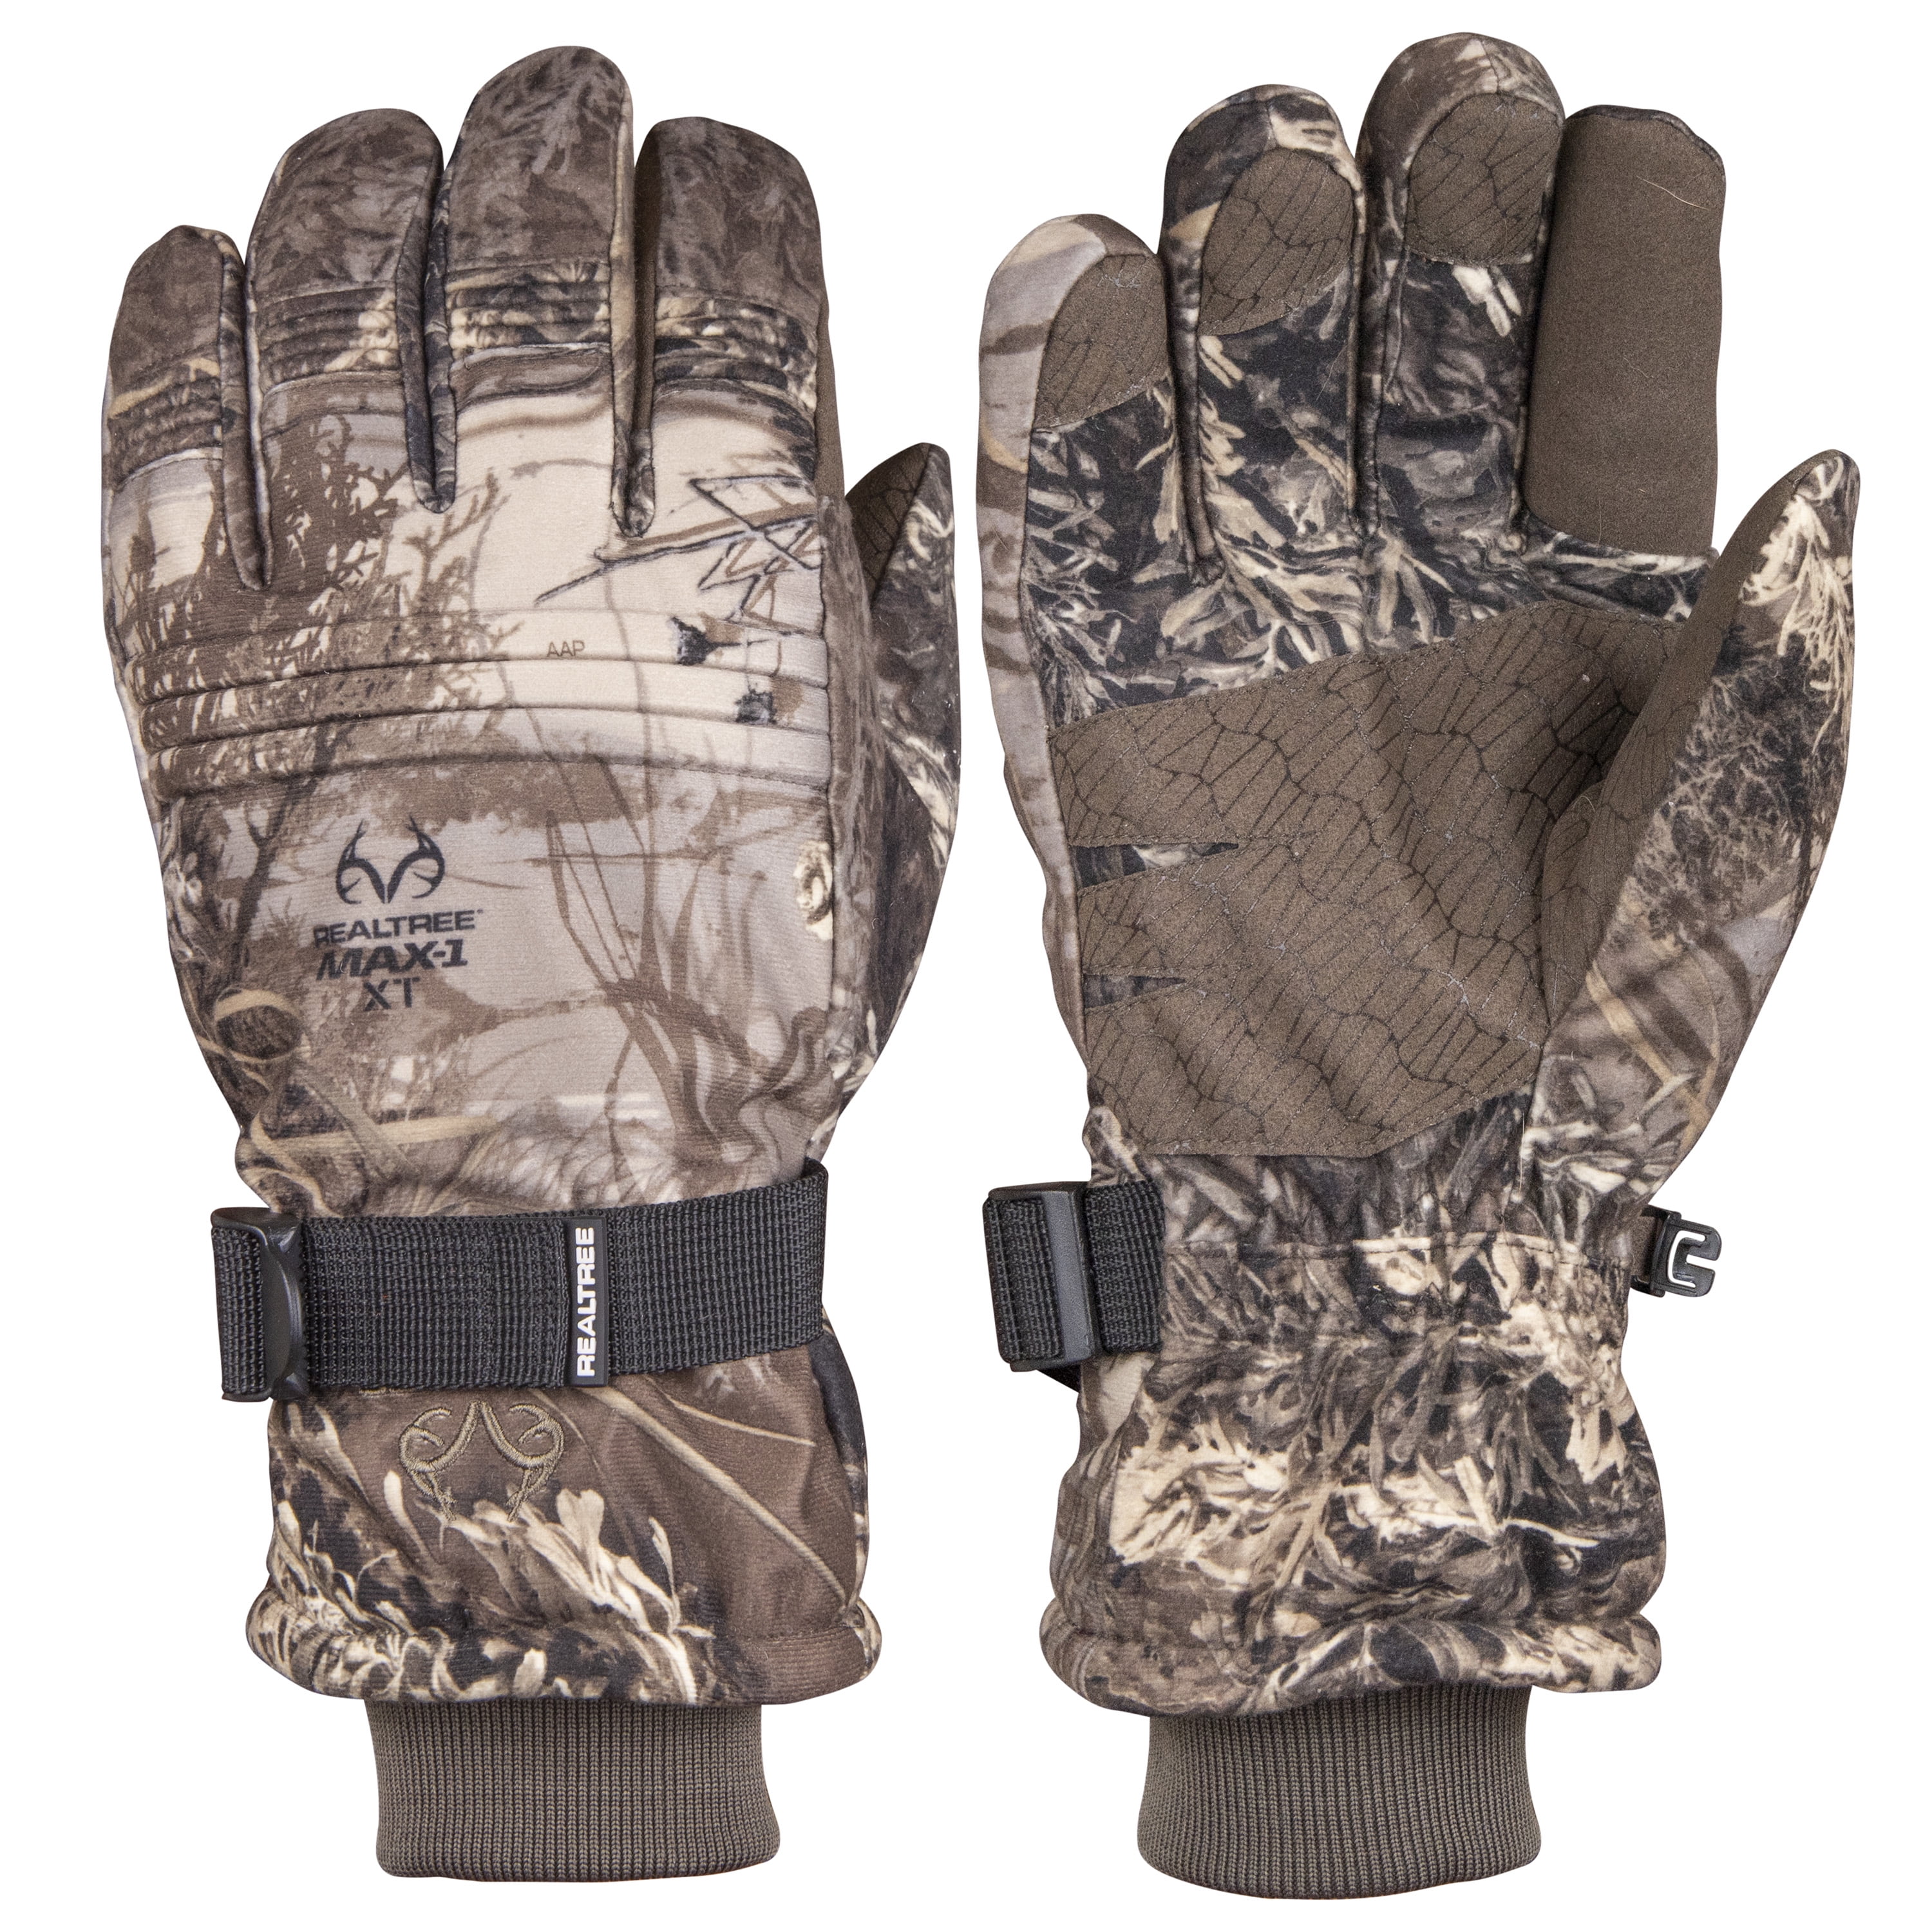 Realtree Work Gloves Camo Hunting Outdoor Synthetic Leather Palm Gloves Medium 